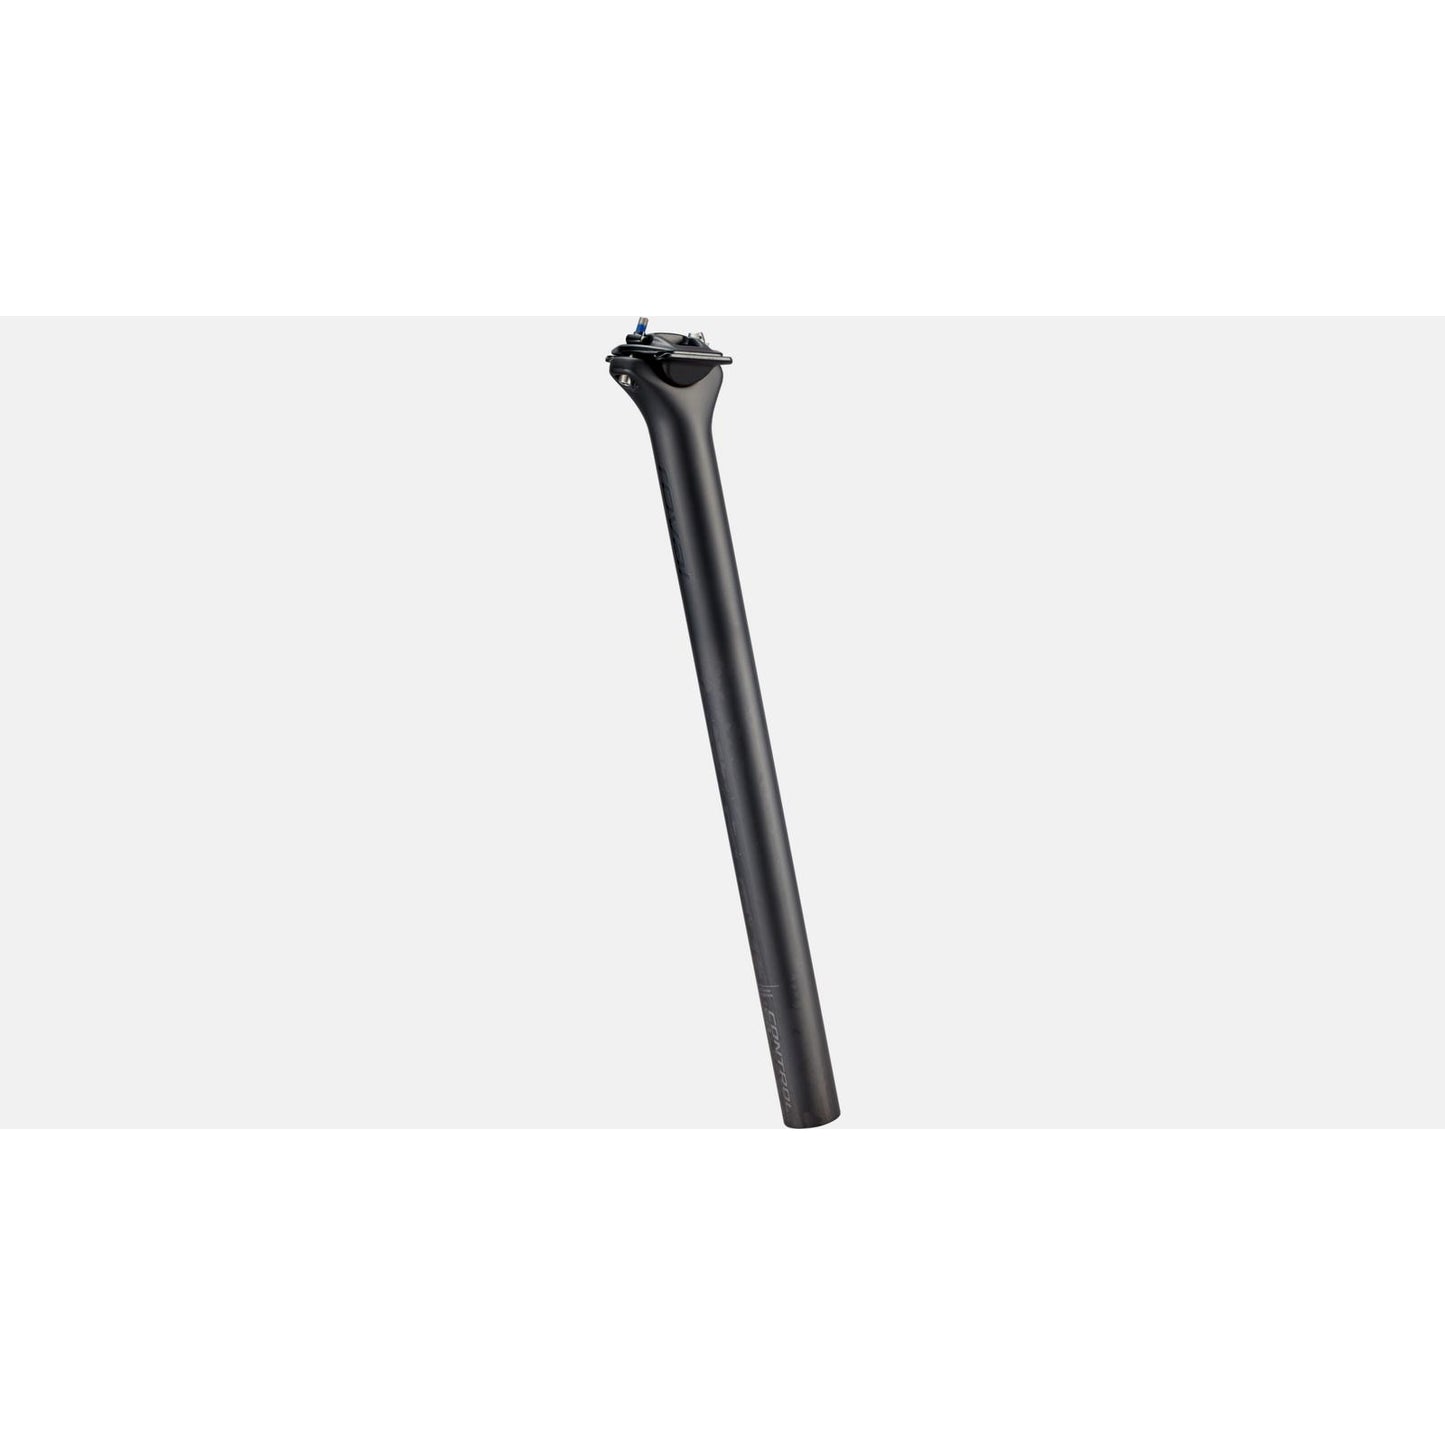 Specialized Roval Control SL Seat Post - Seatposts - Bicycle Warehouse